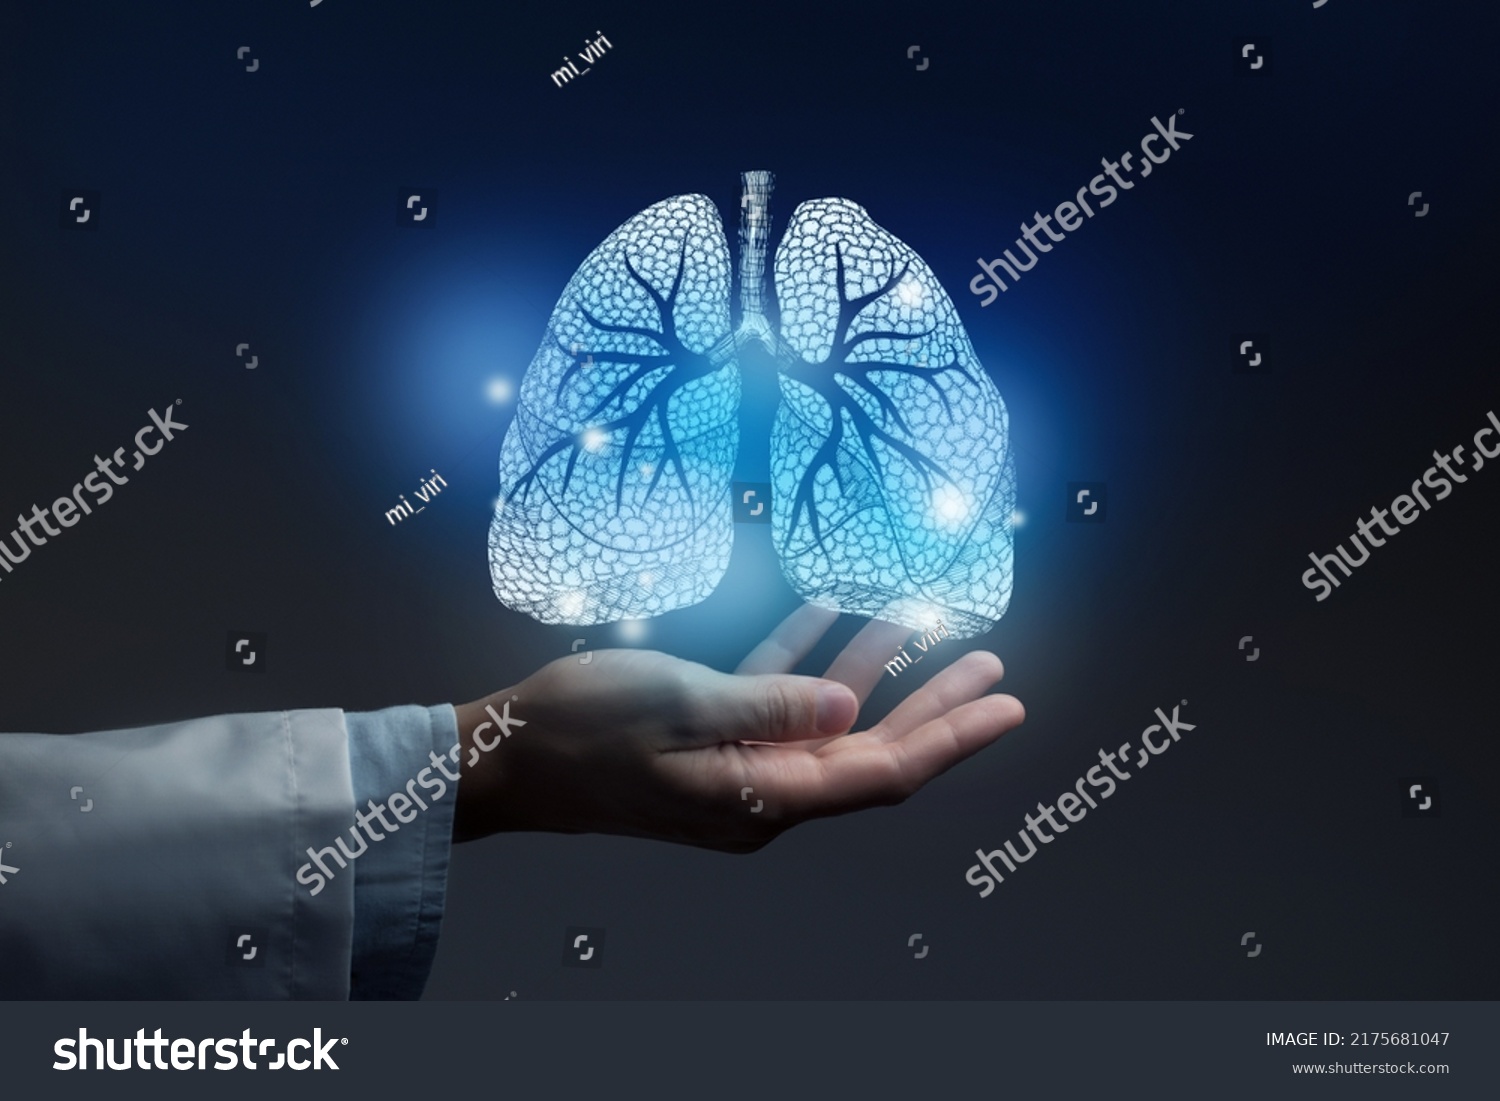 Medical banner with lungs illustration on blue background with large copy space for text or checklist. #2175681047